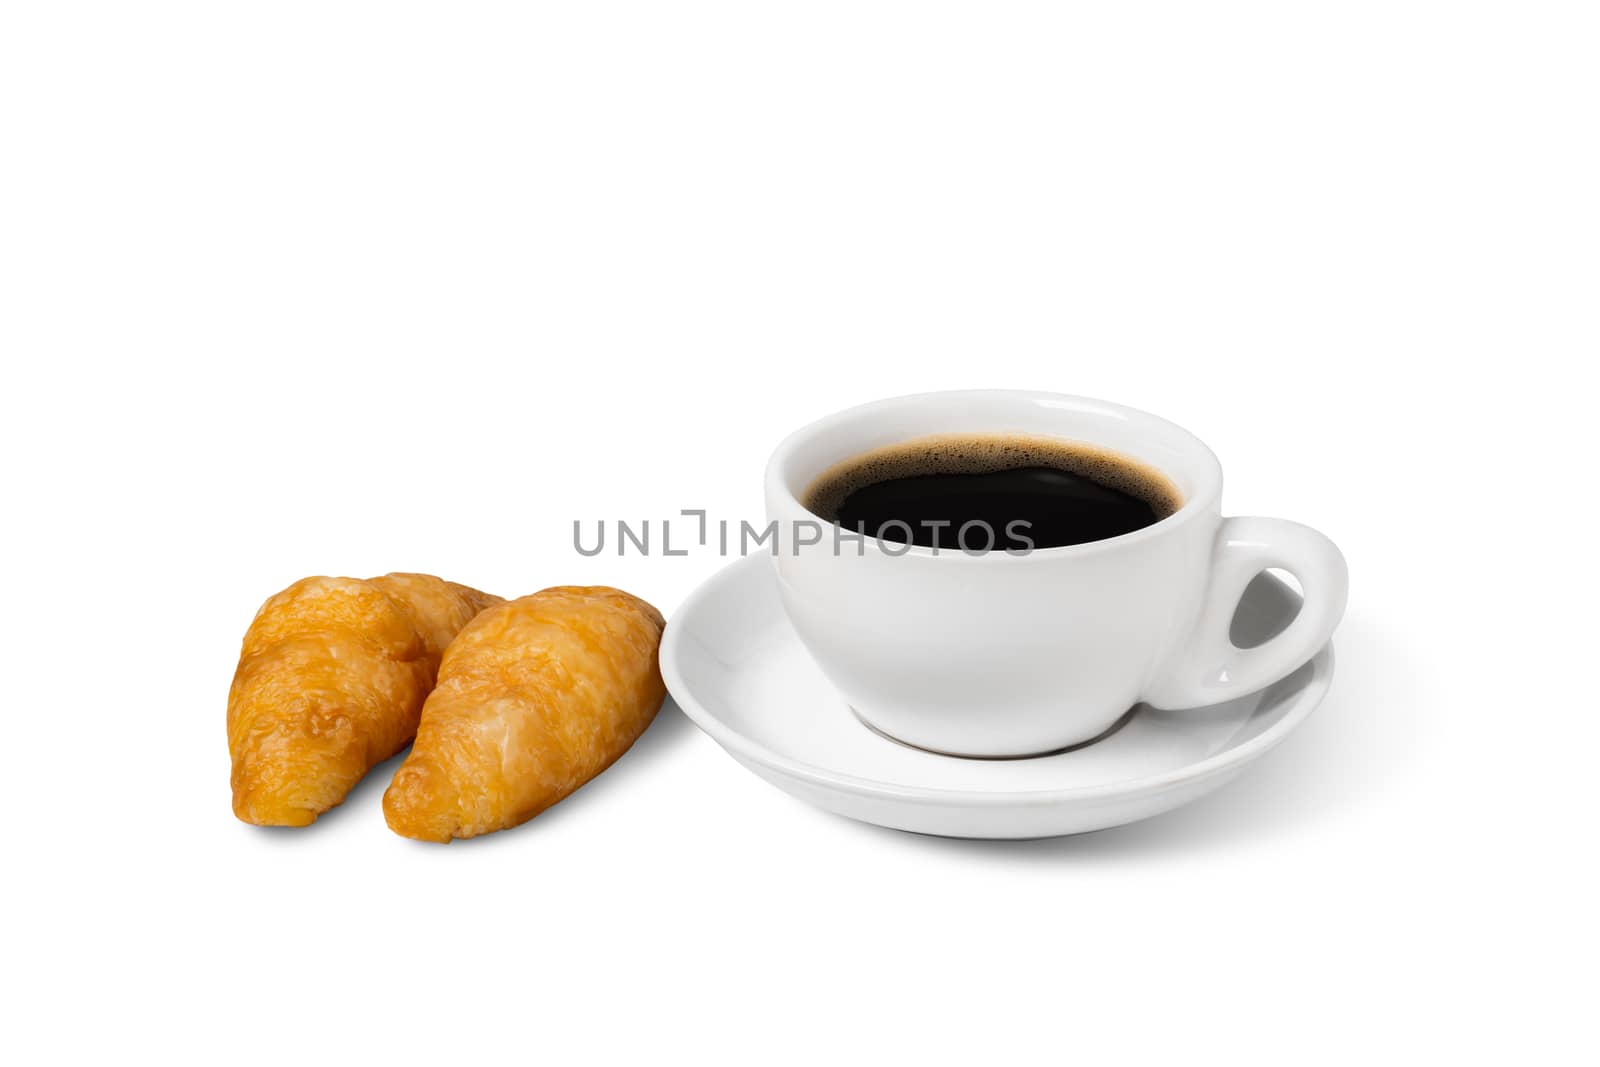 Fresh croissant with coffee white cup with clipping path on plate isolated on a white background.